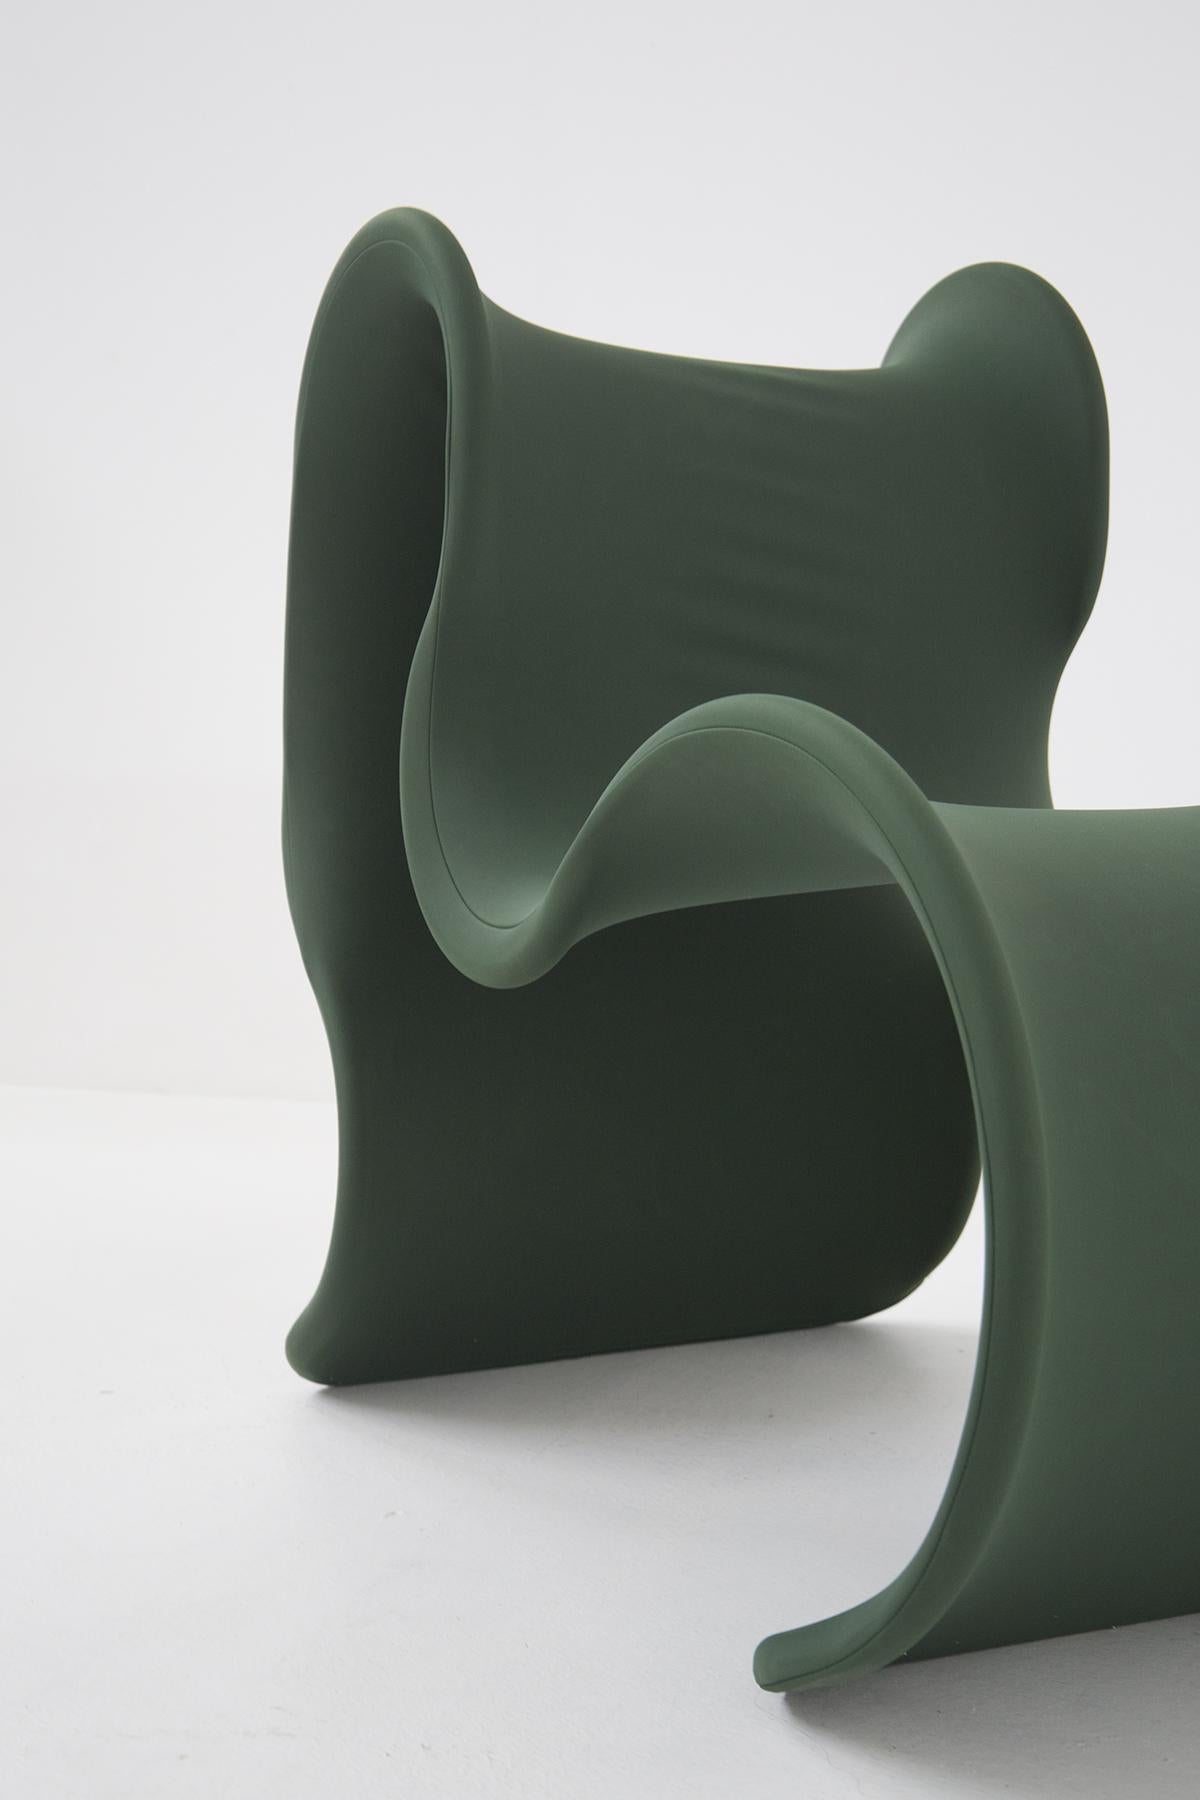 Late 20th Century Fiocco Armchair in Dark Green by Gianni Pareschi for Busnelli For Sale